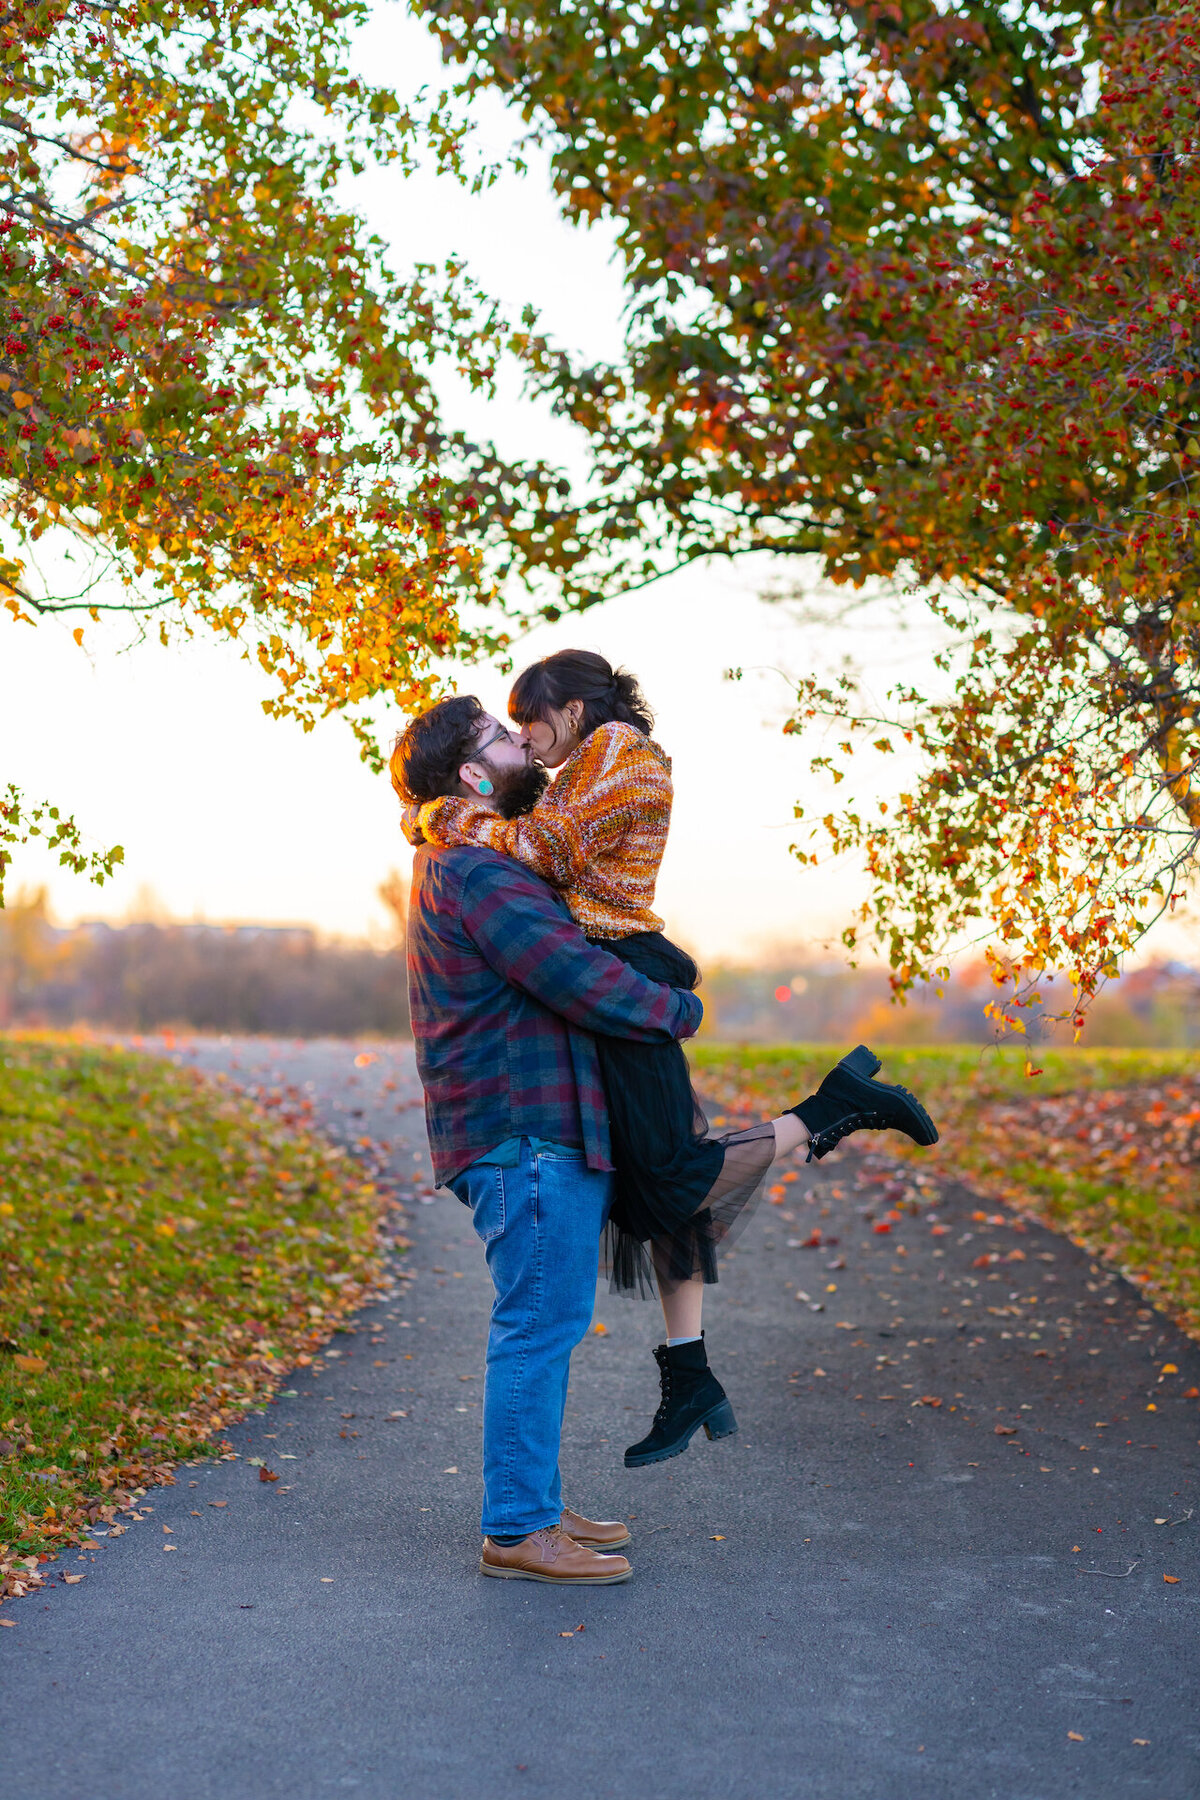 Saralyn & Andrew Engagement Session, 10-29-22, Glenview Park District, IL, Maira Ochoa Photography -1029